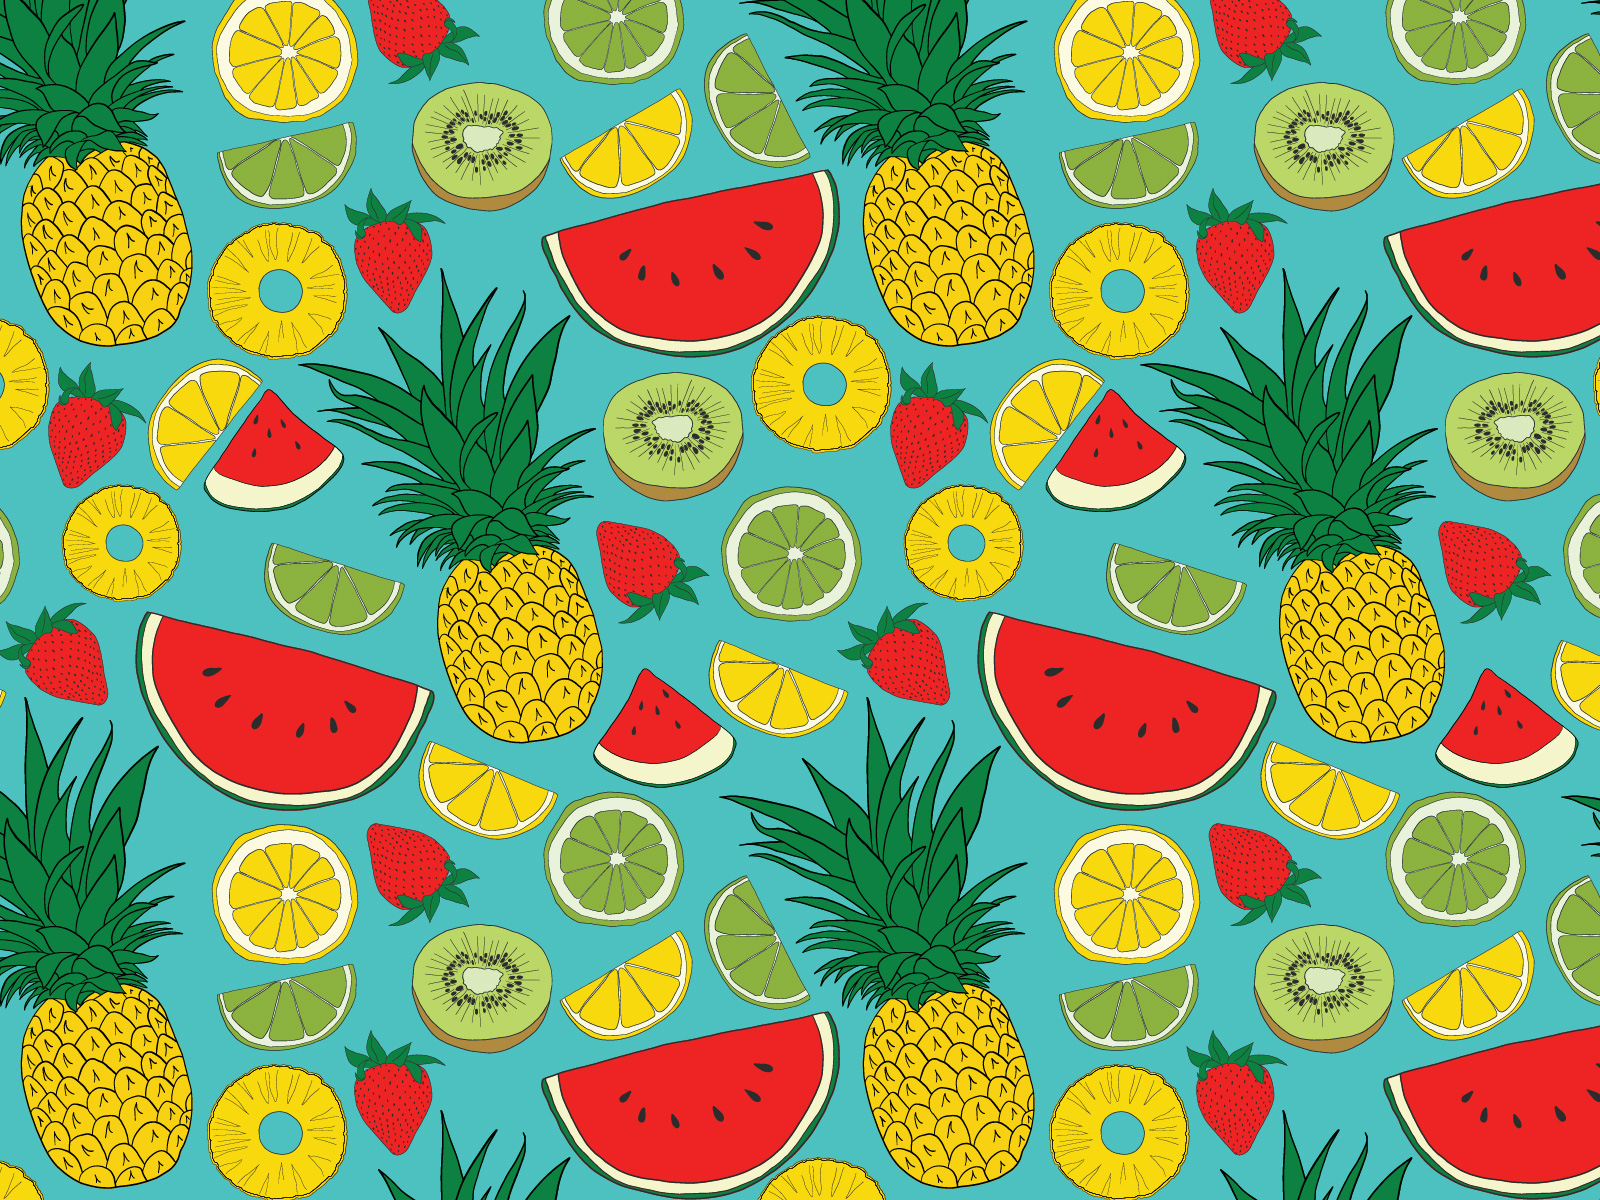 Summer Fruit Seamless Pattern by Sarah Barnes on Dribbble